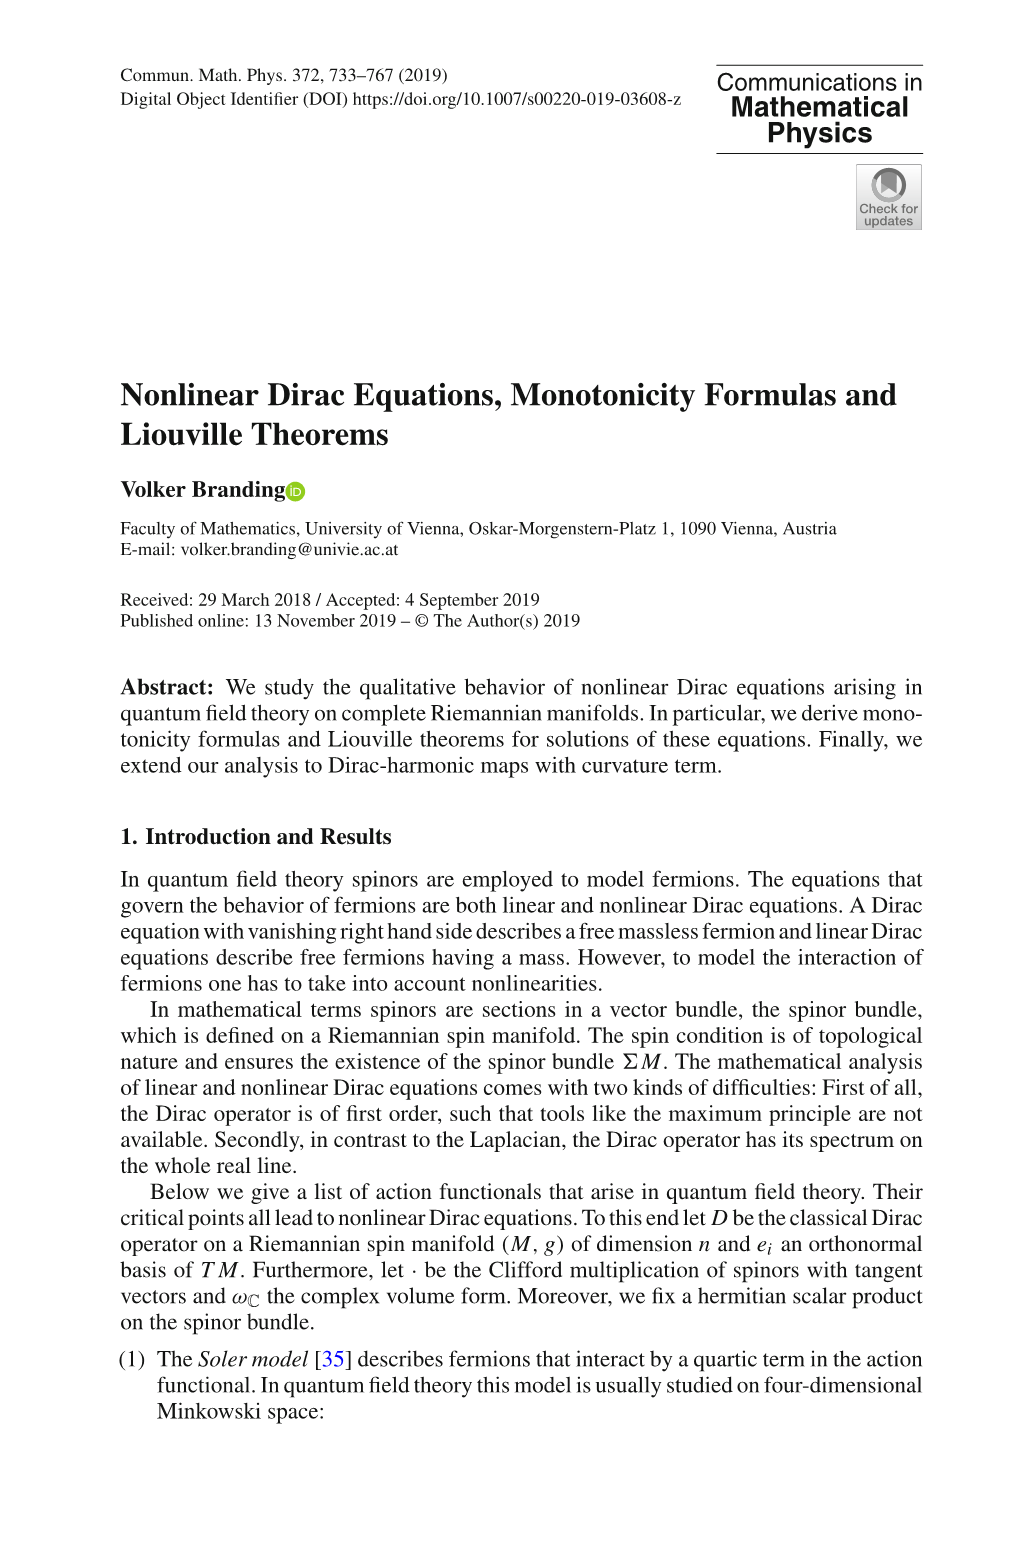 Nonlinear Dirac Equations, Monotonicity Formulas and Liouville Theorems